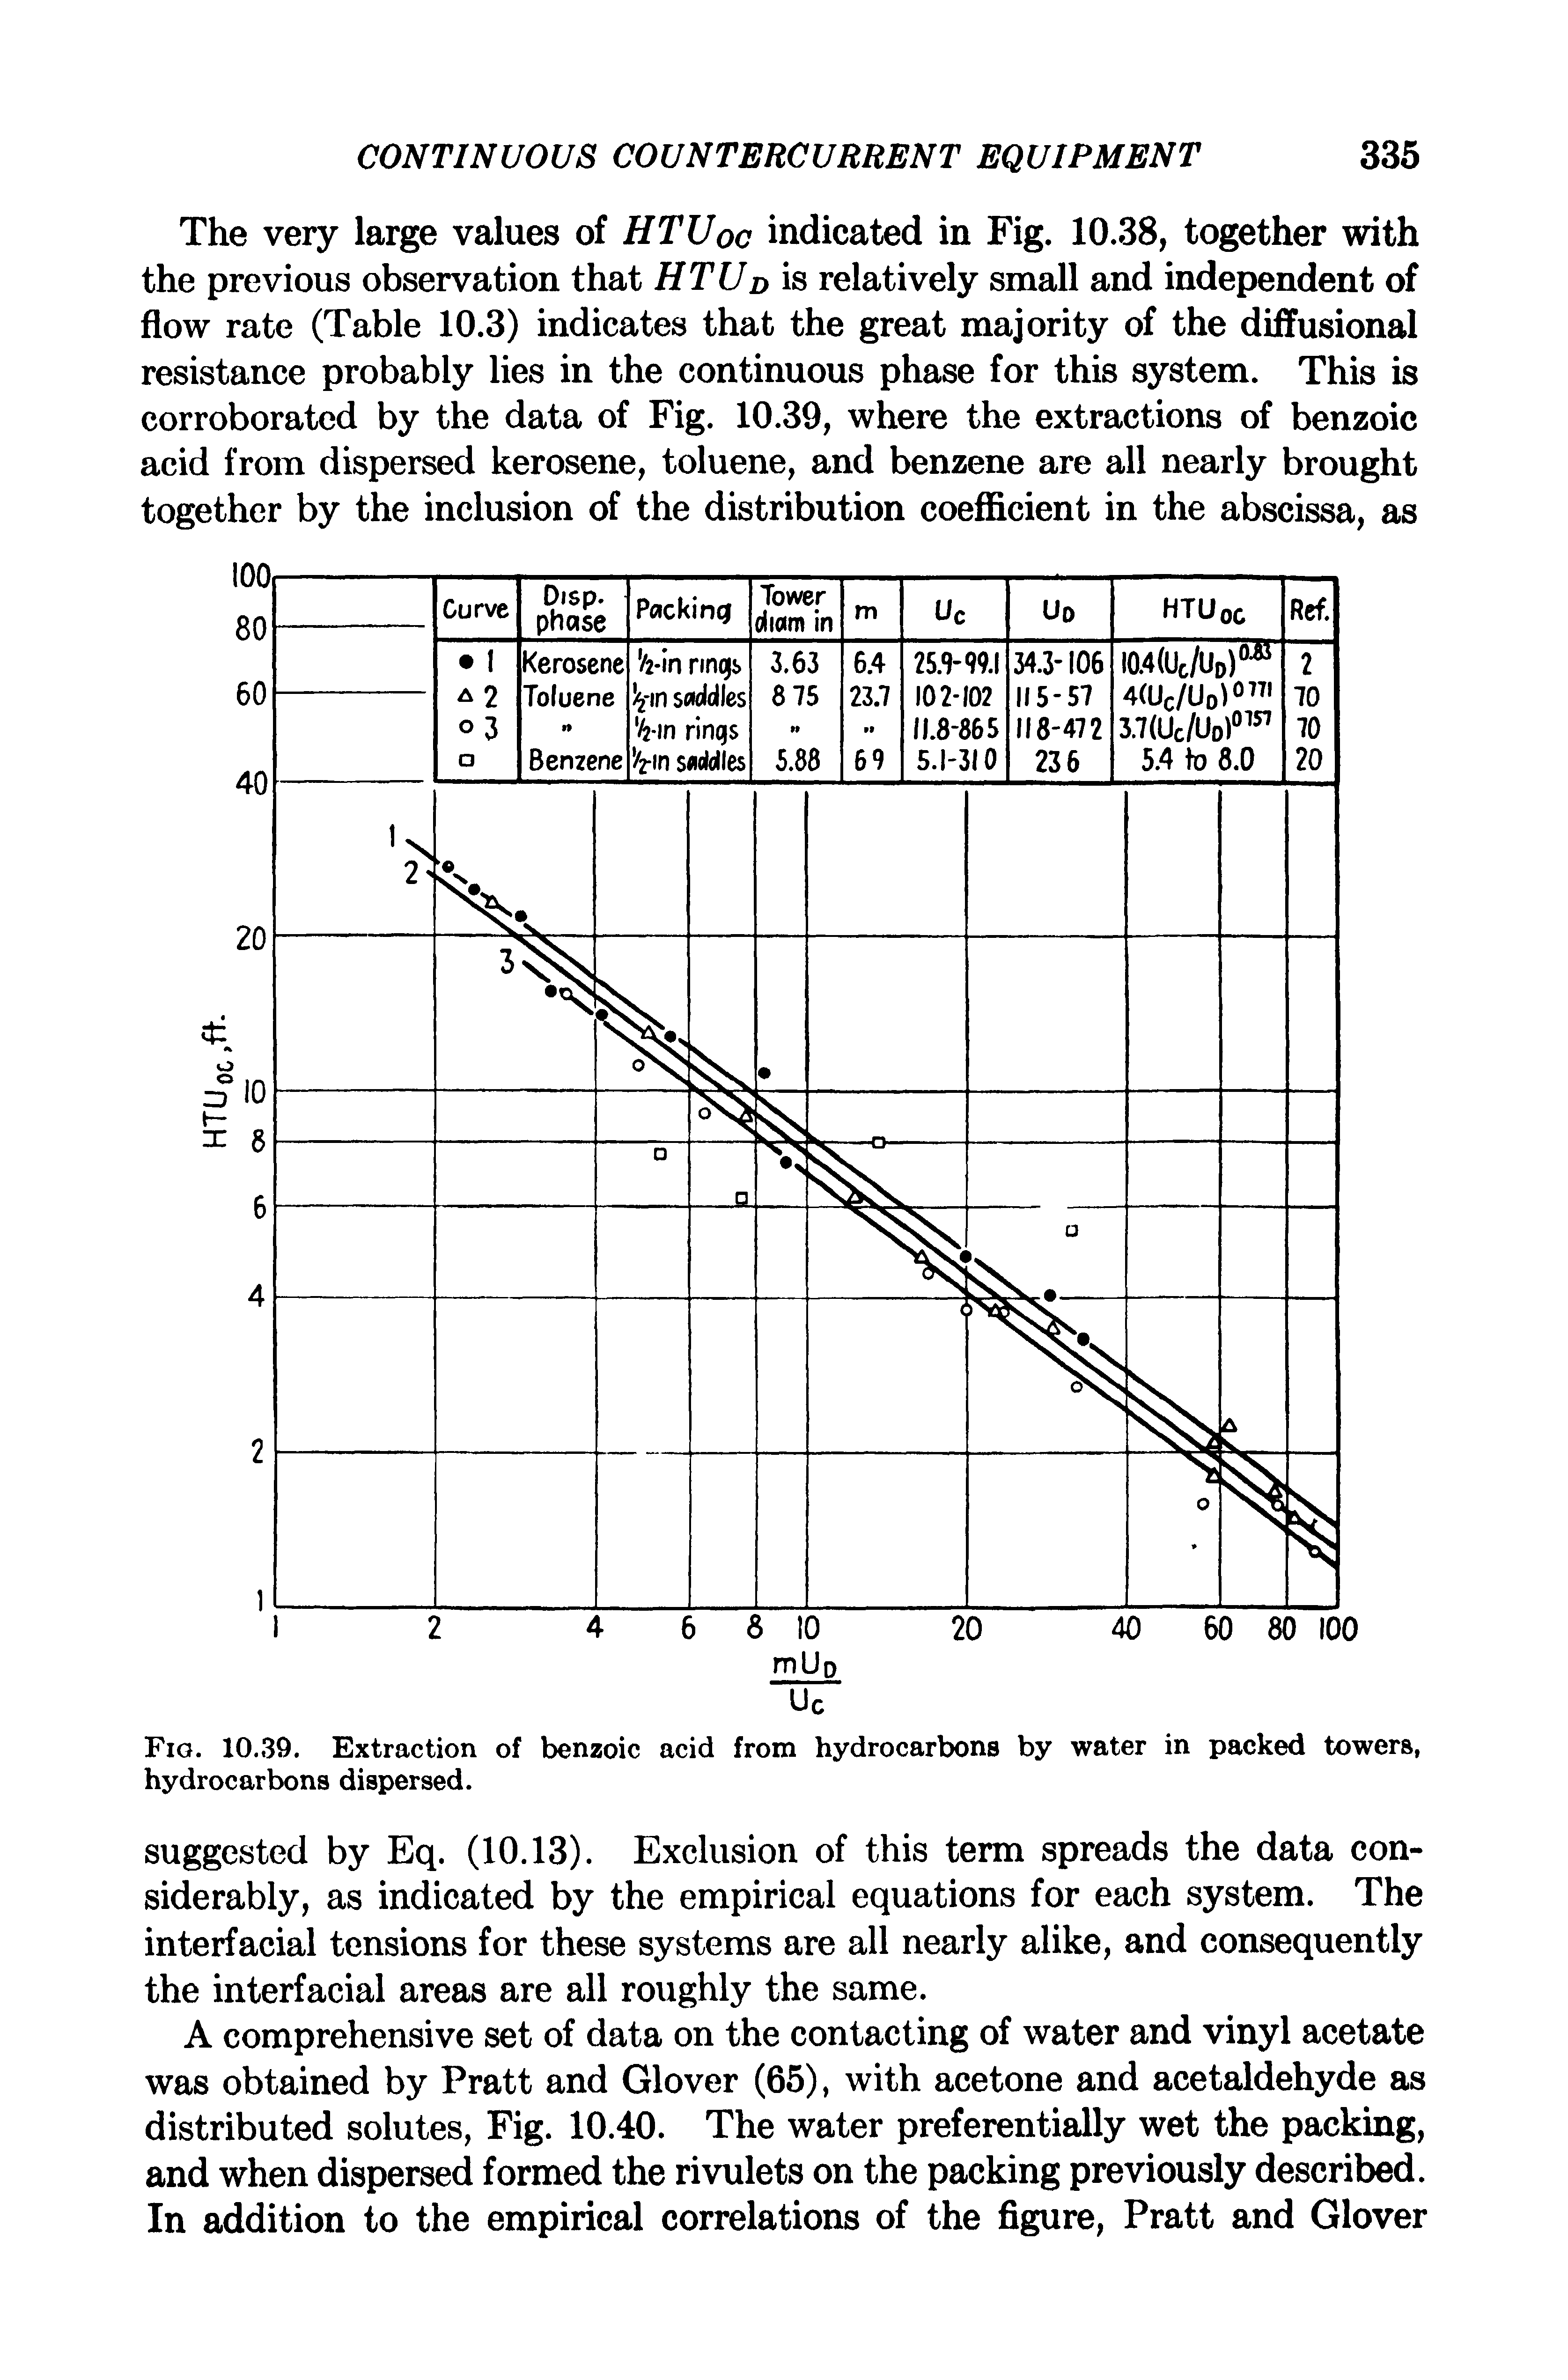 Fig. 10.39. Extraction of benzoic acid from hydrocarbons by water in packed towers, hydrocarbons dispersed.